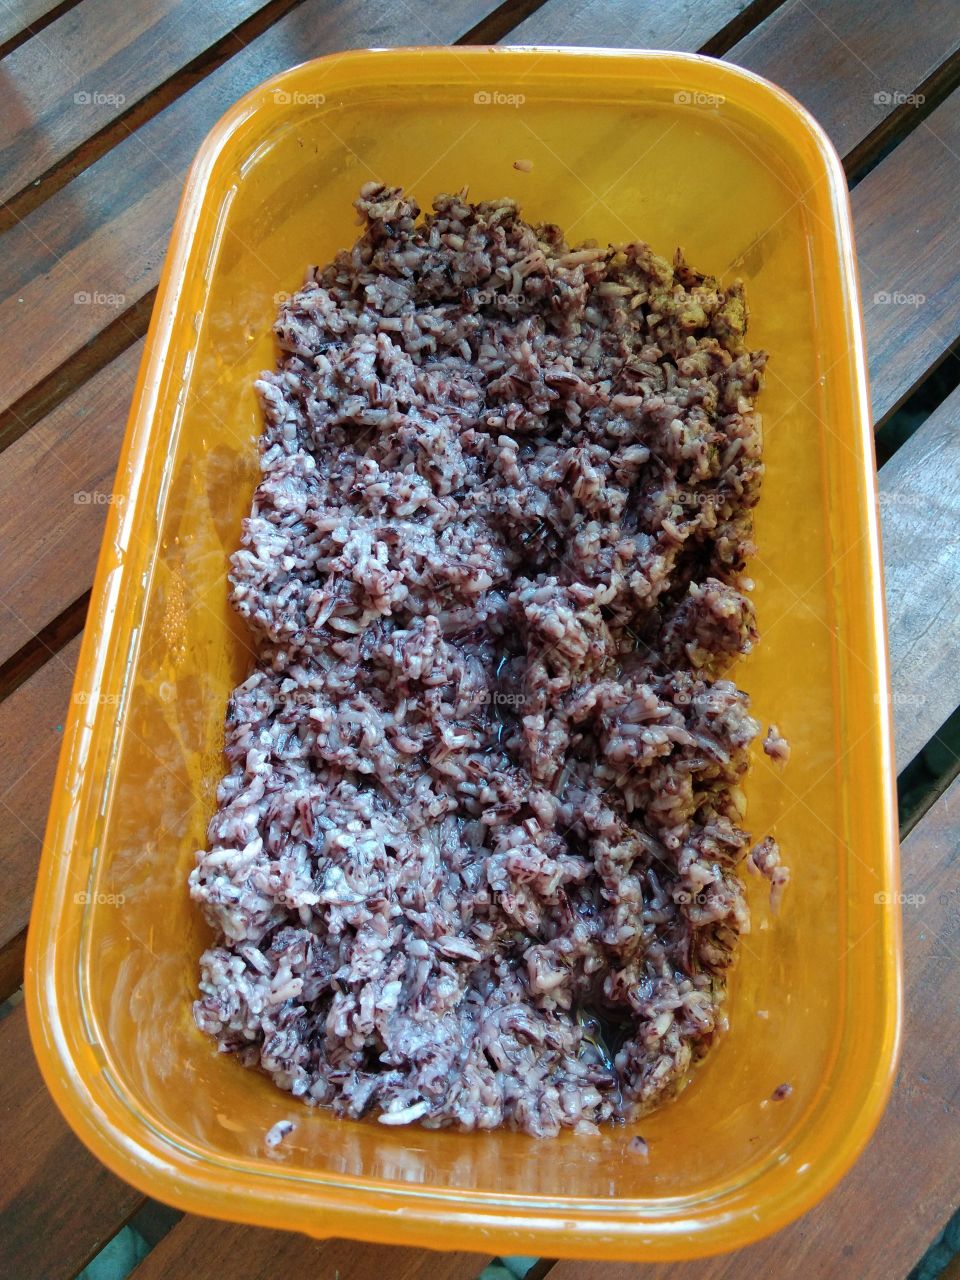 indonesia traditional food fermented from black sticky rice